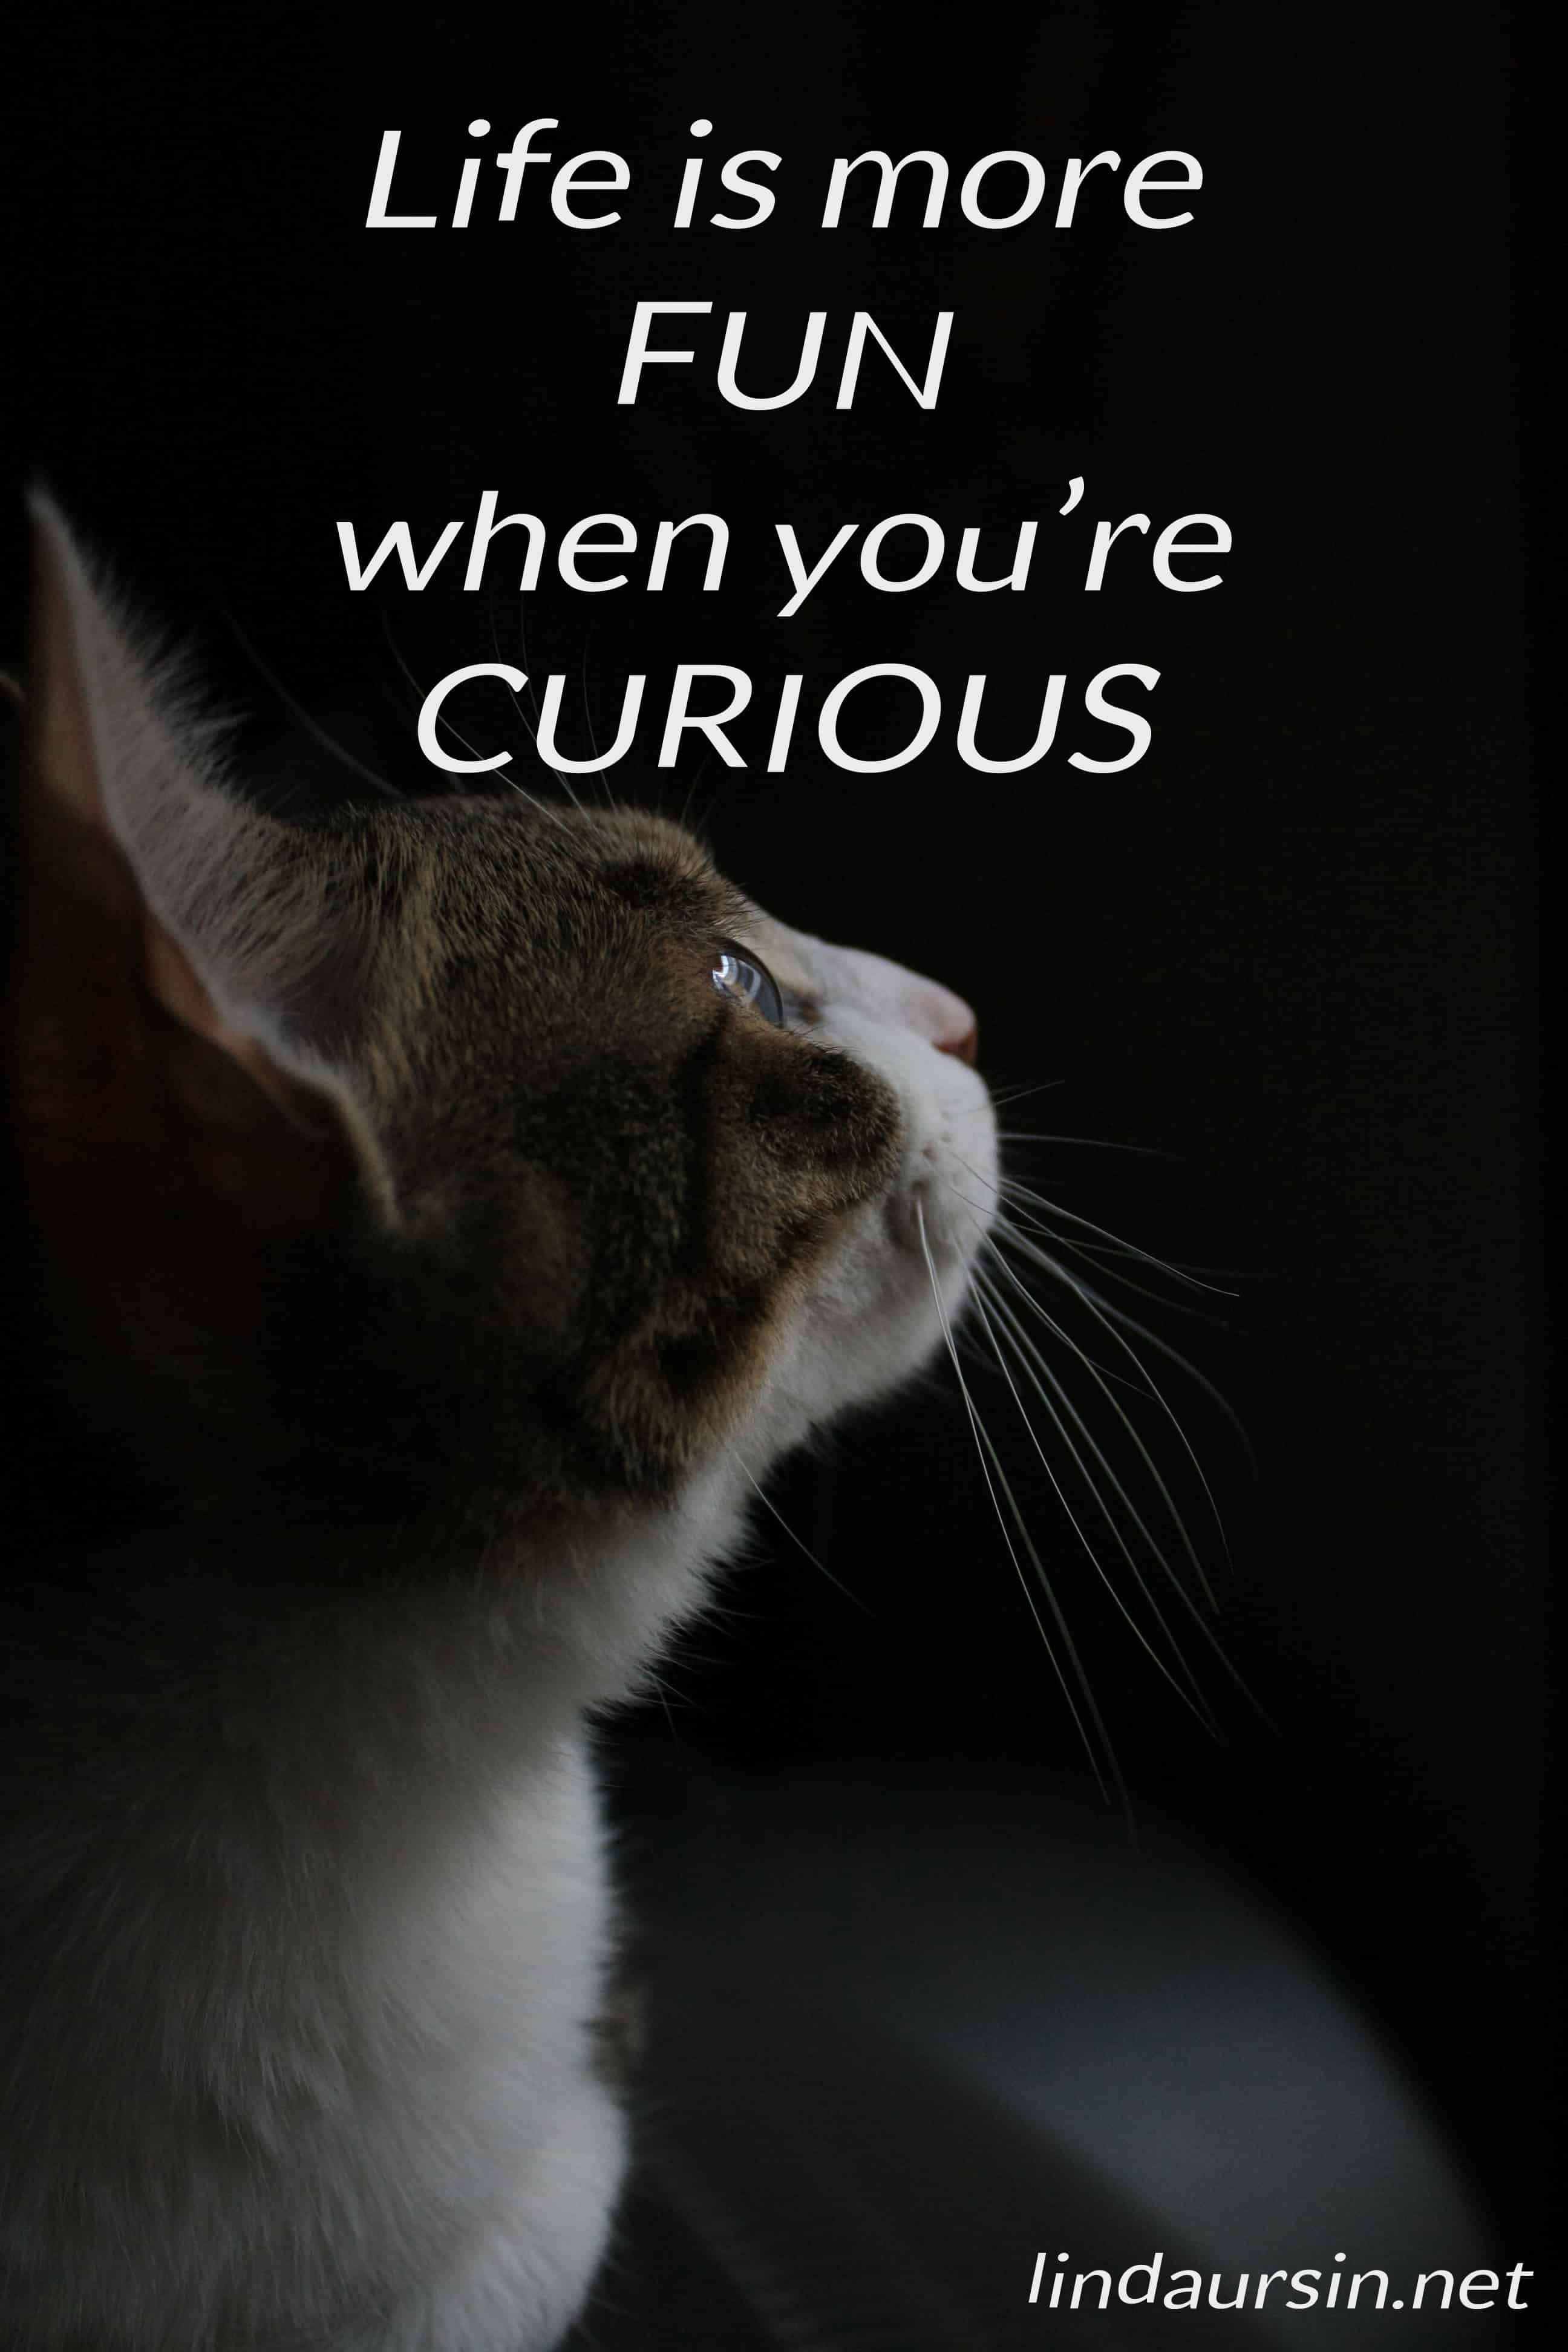 Life is more fun when you're curious